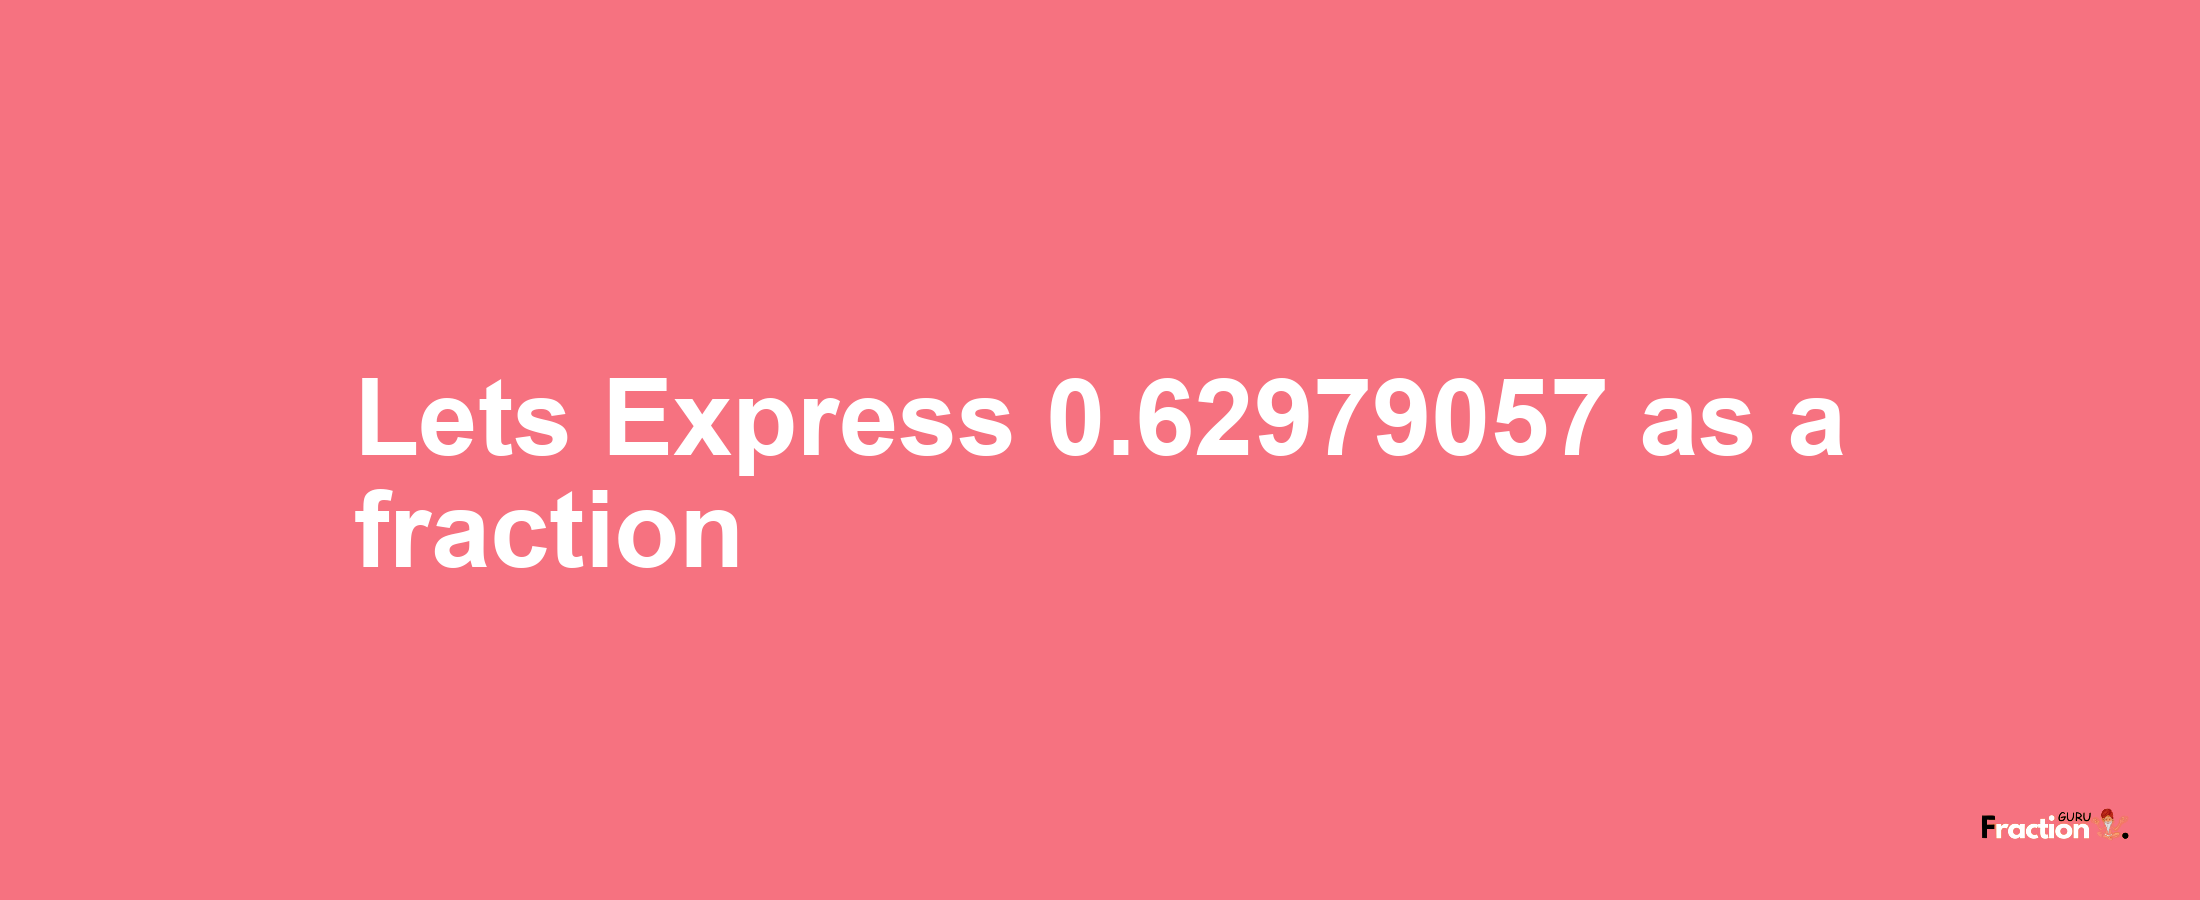 Lets Express 0.62979057 as afraction